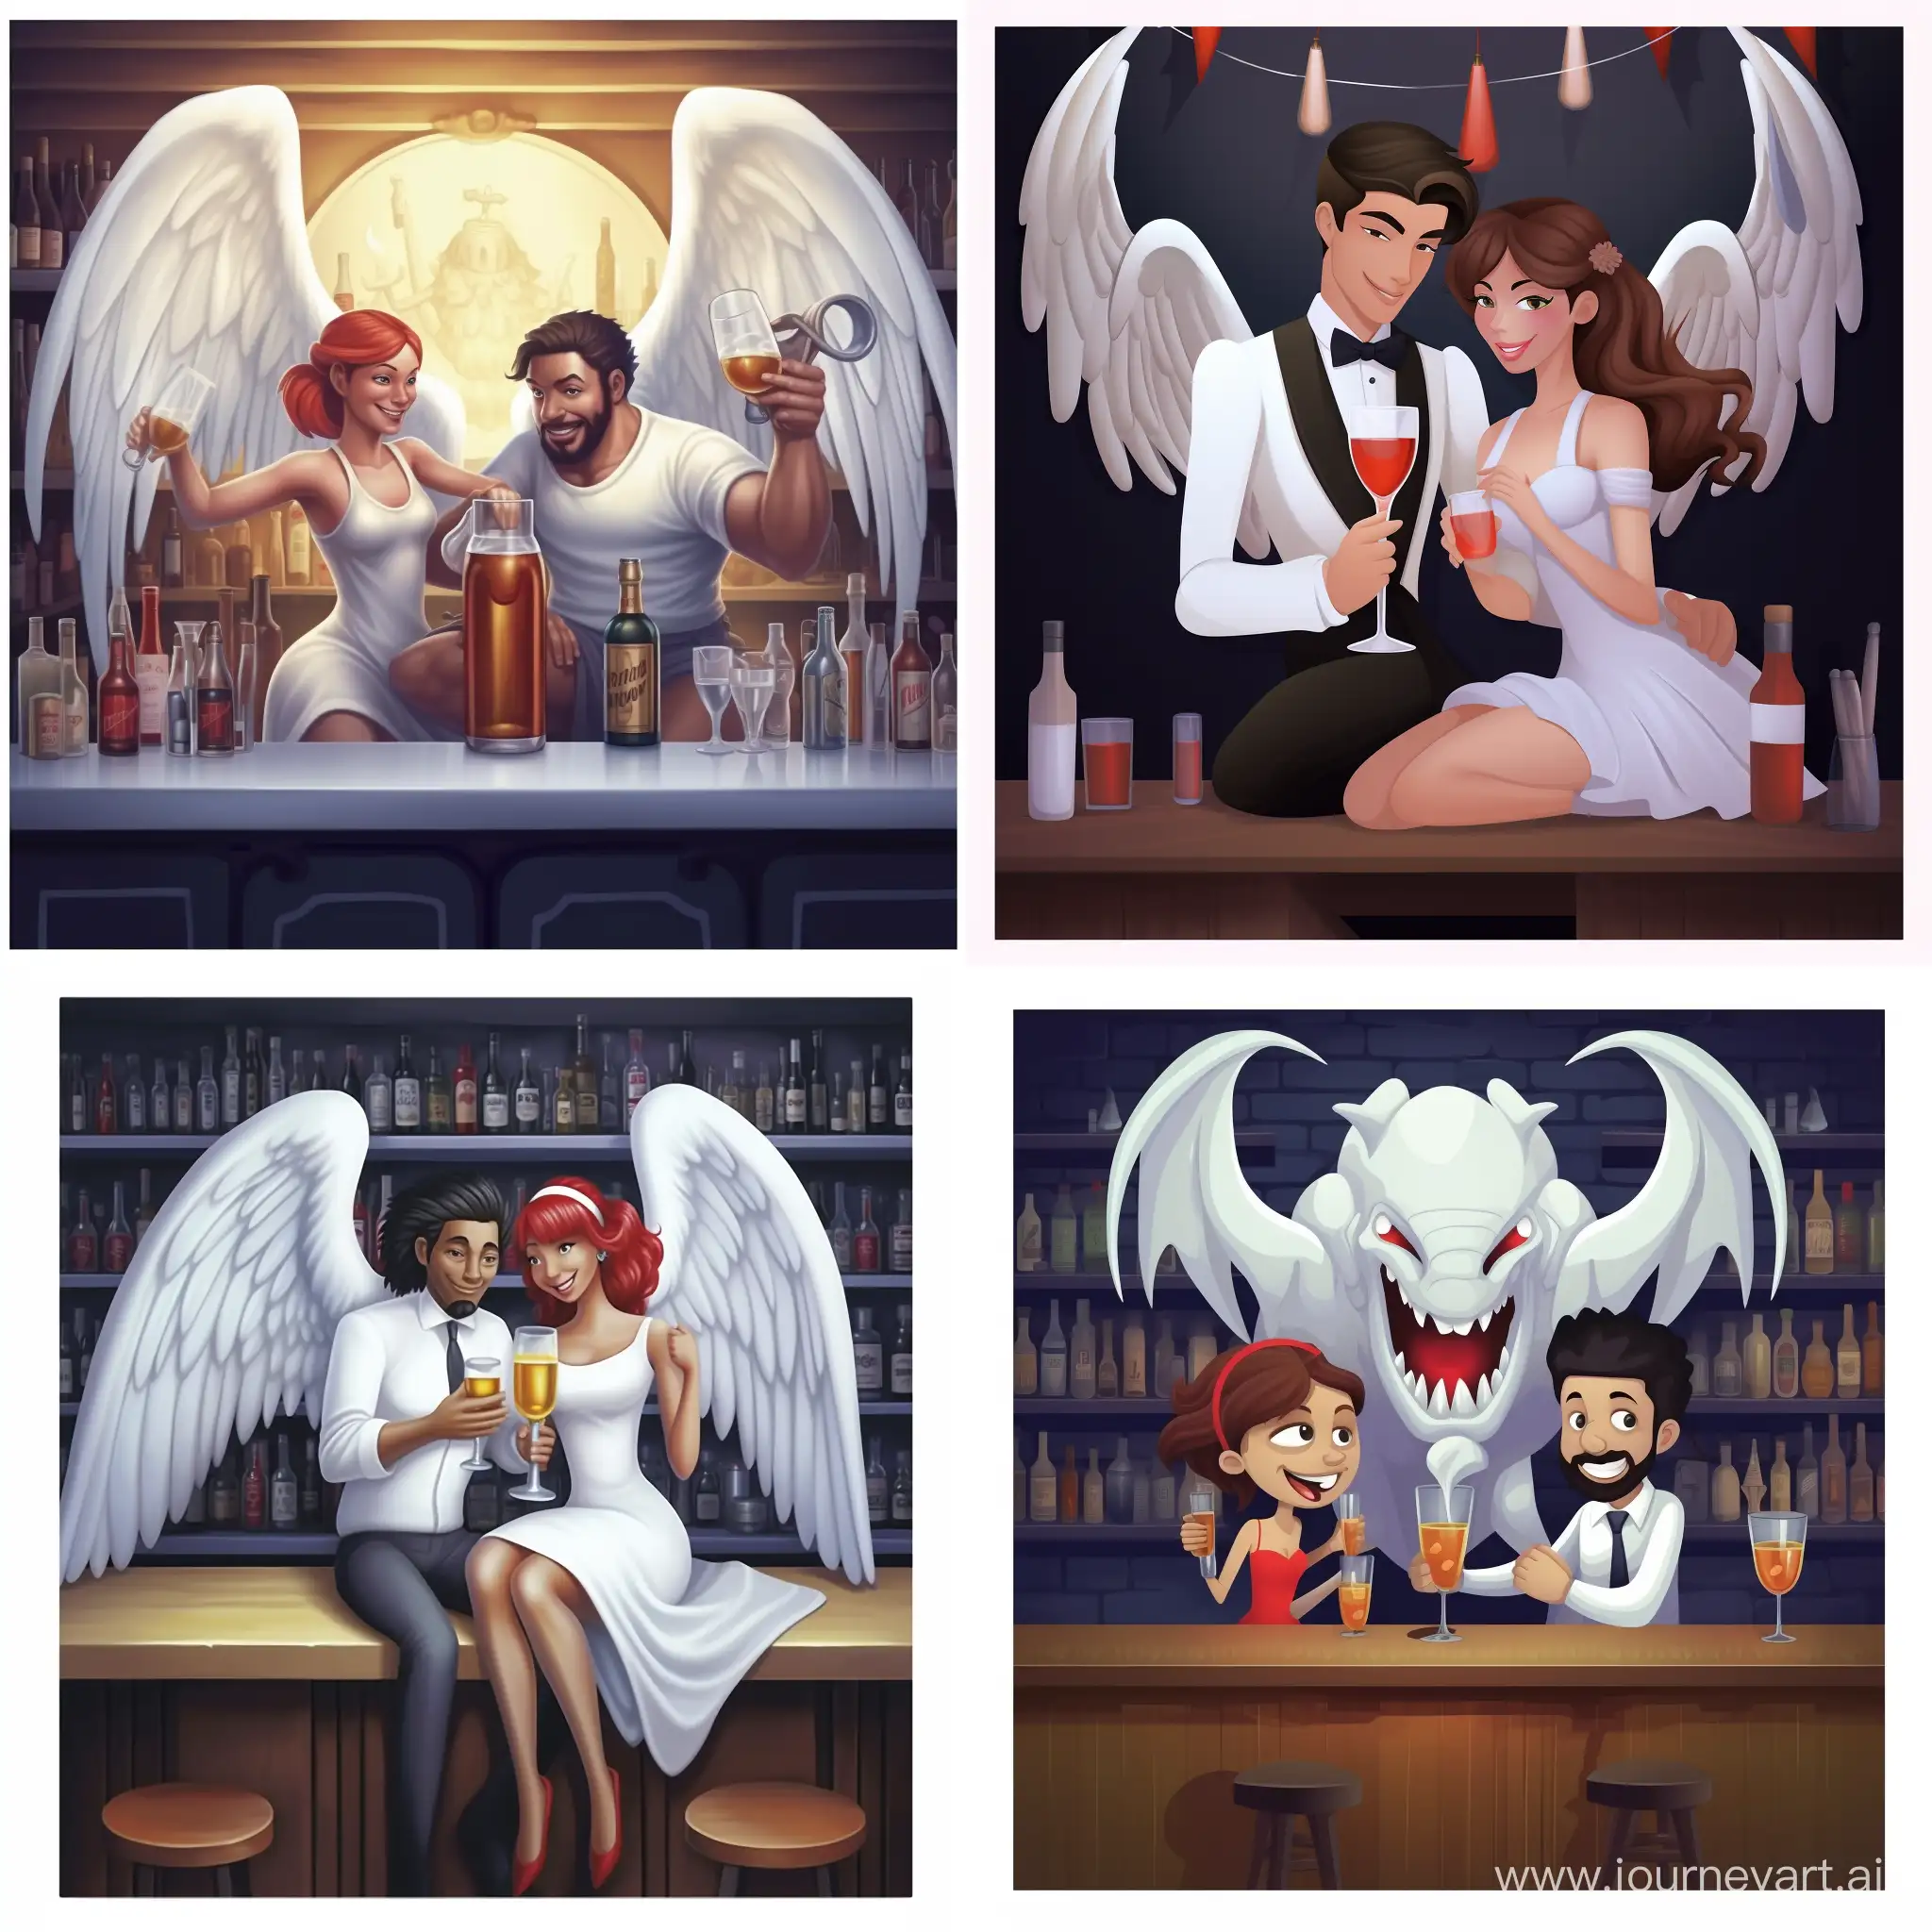 Heavenly-Harmony-and-Hellish-Revelry-Angel-and-Demon-Unite-in-a-Vibrant-Bar-Scene